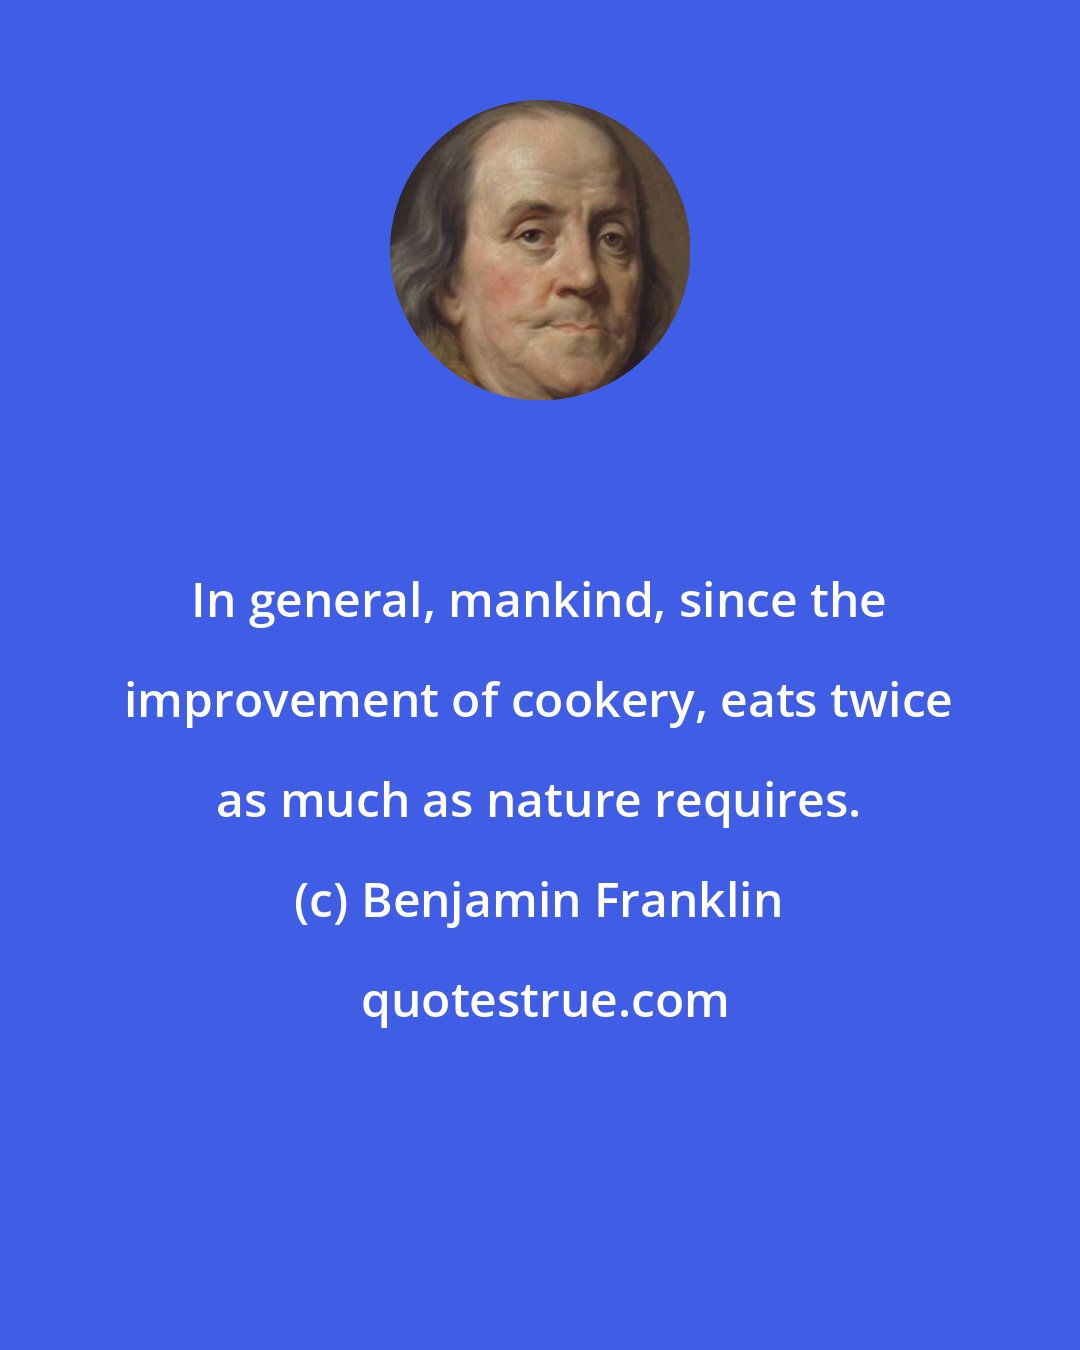 Benjamin Franklin: In general, mankind, since the improvement of cookery, eats twice as much as nature requires.